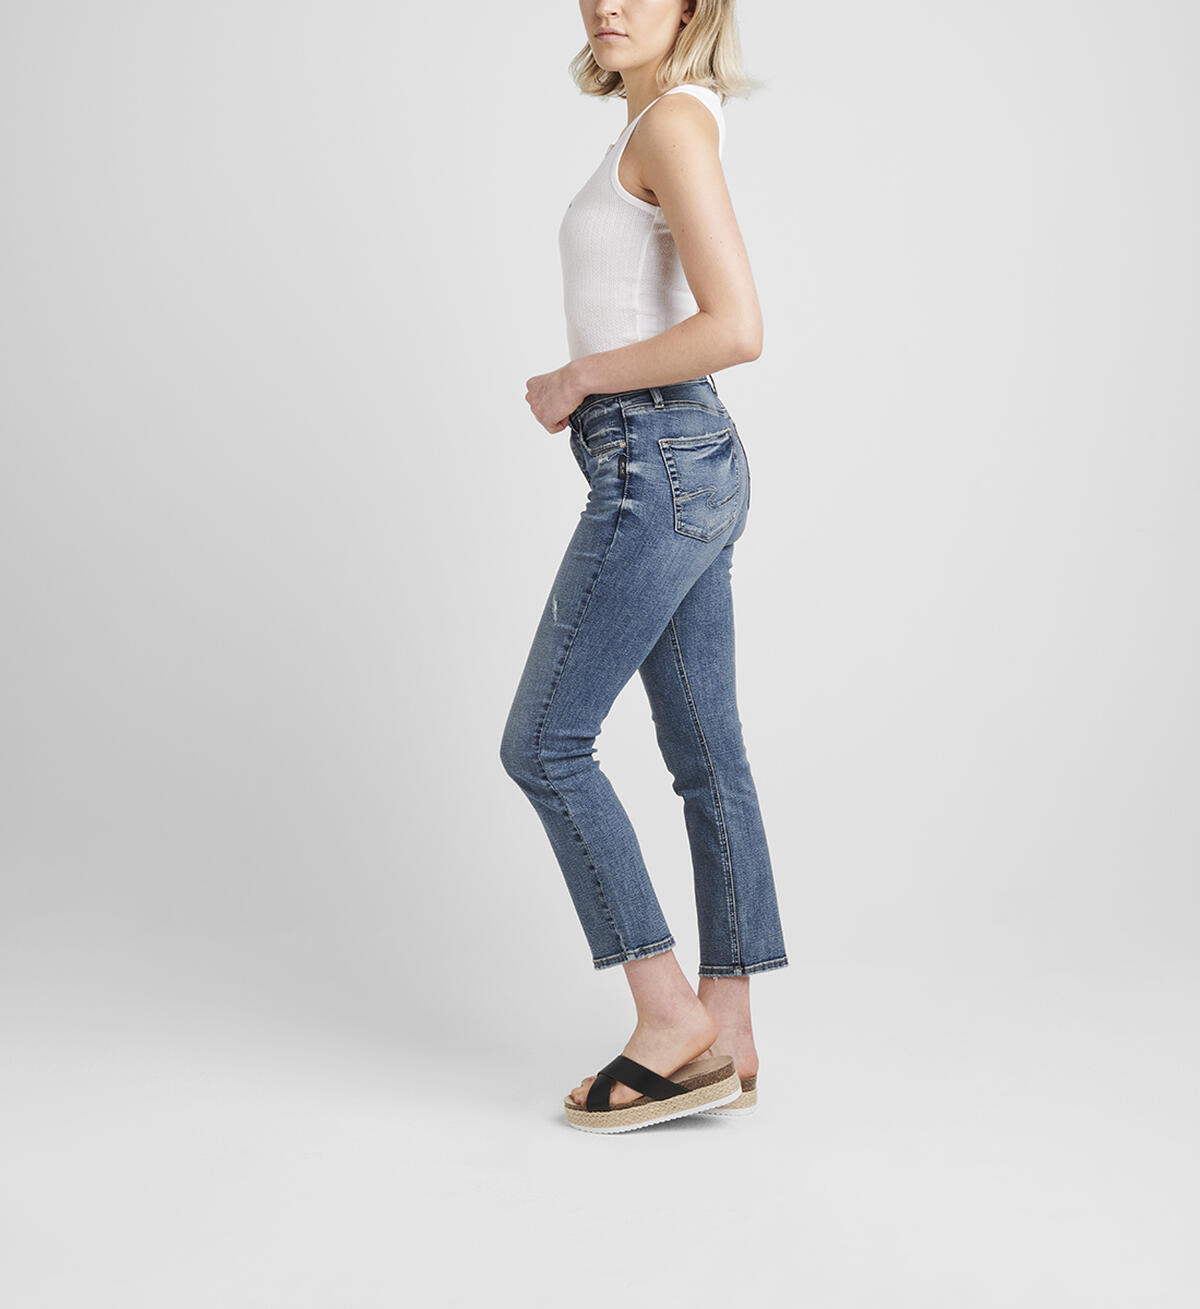 Avery High Rise Straight Crop Jeans, , hi-res image number 2